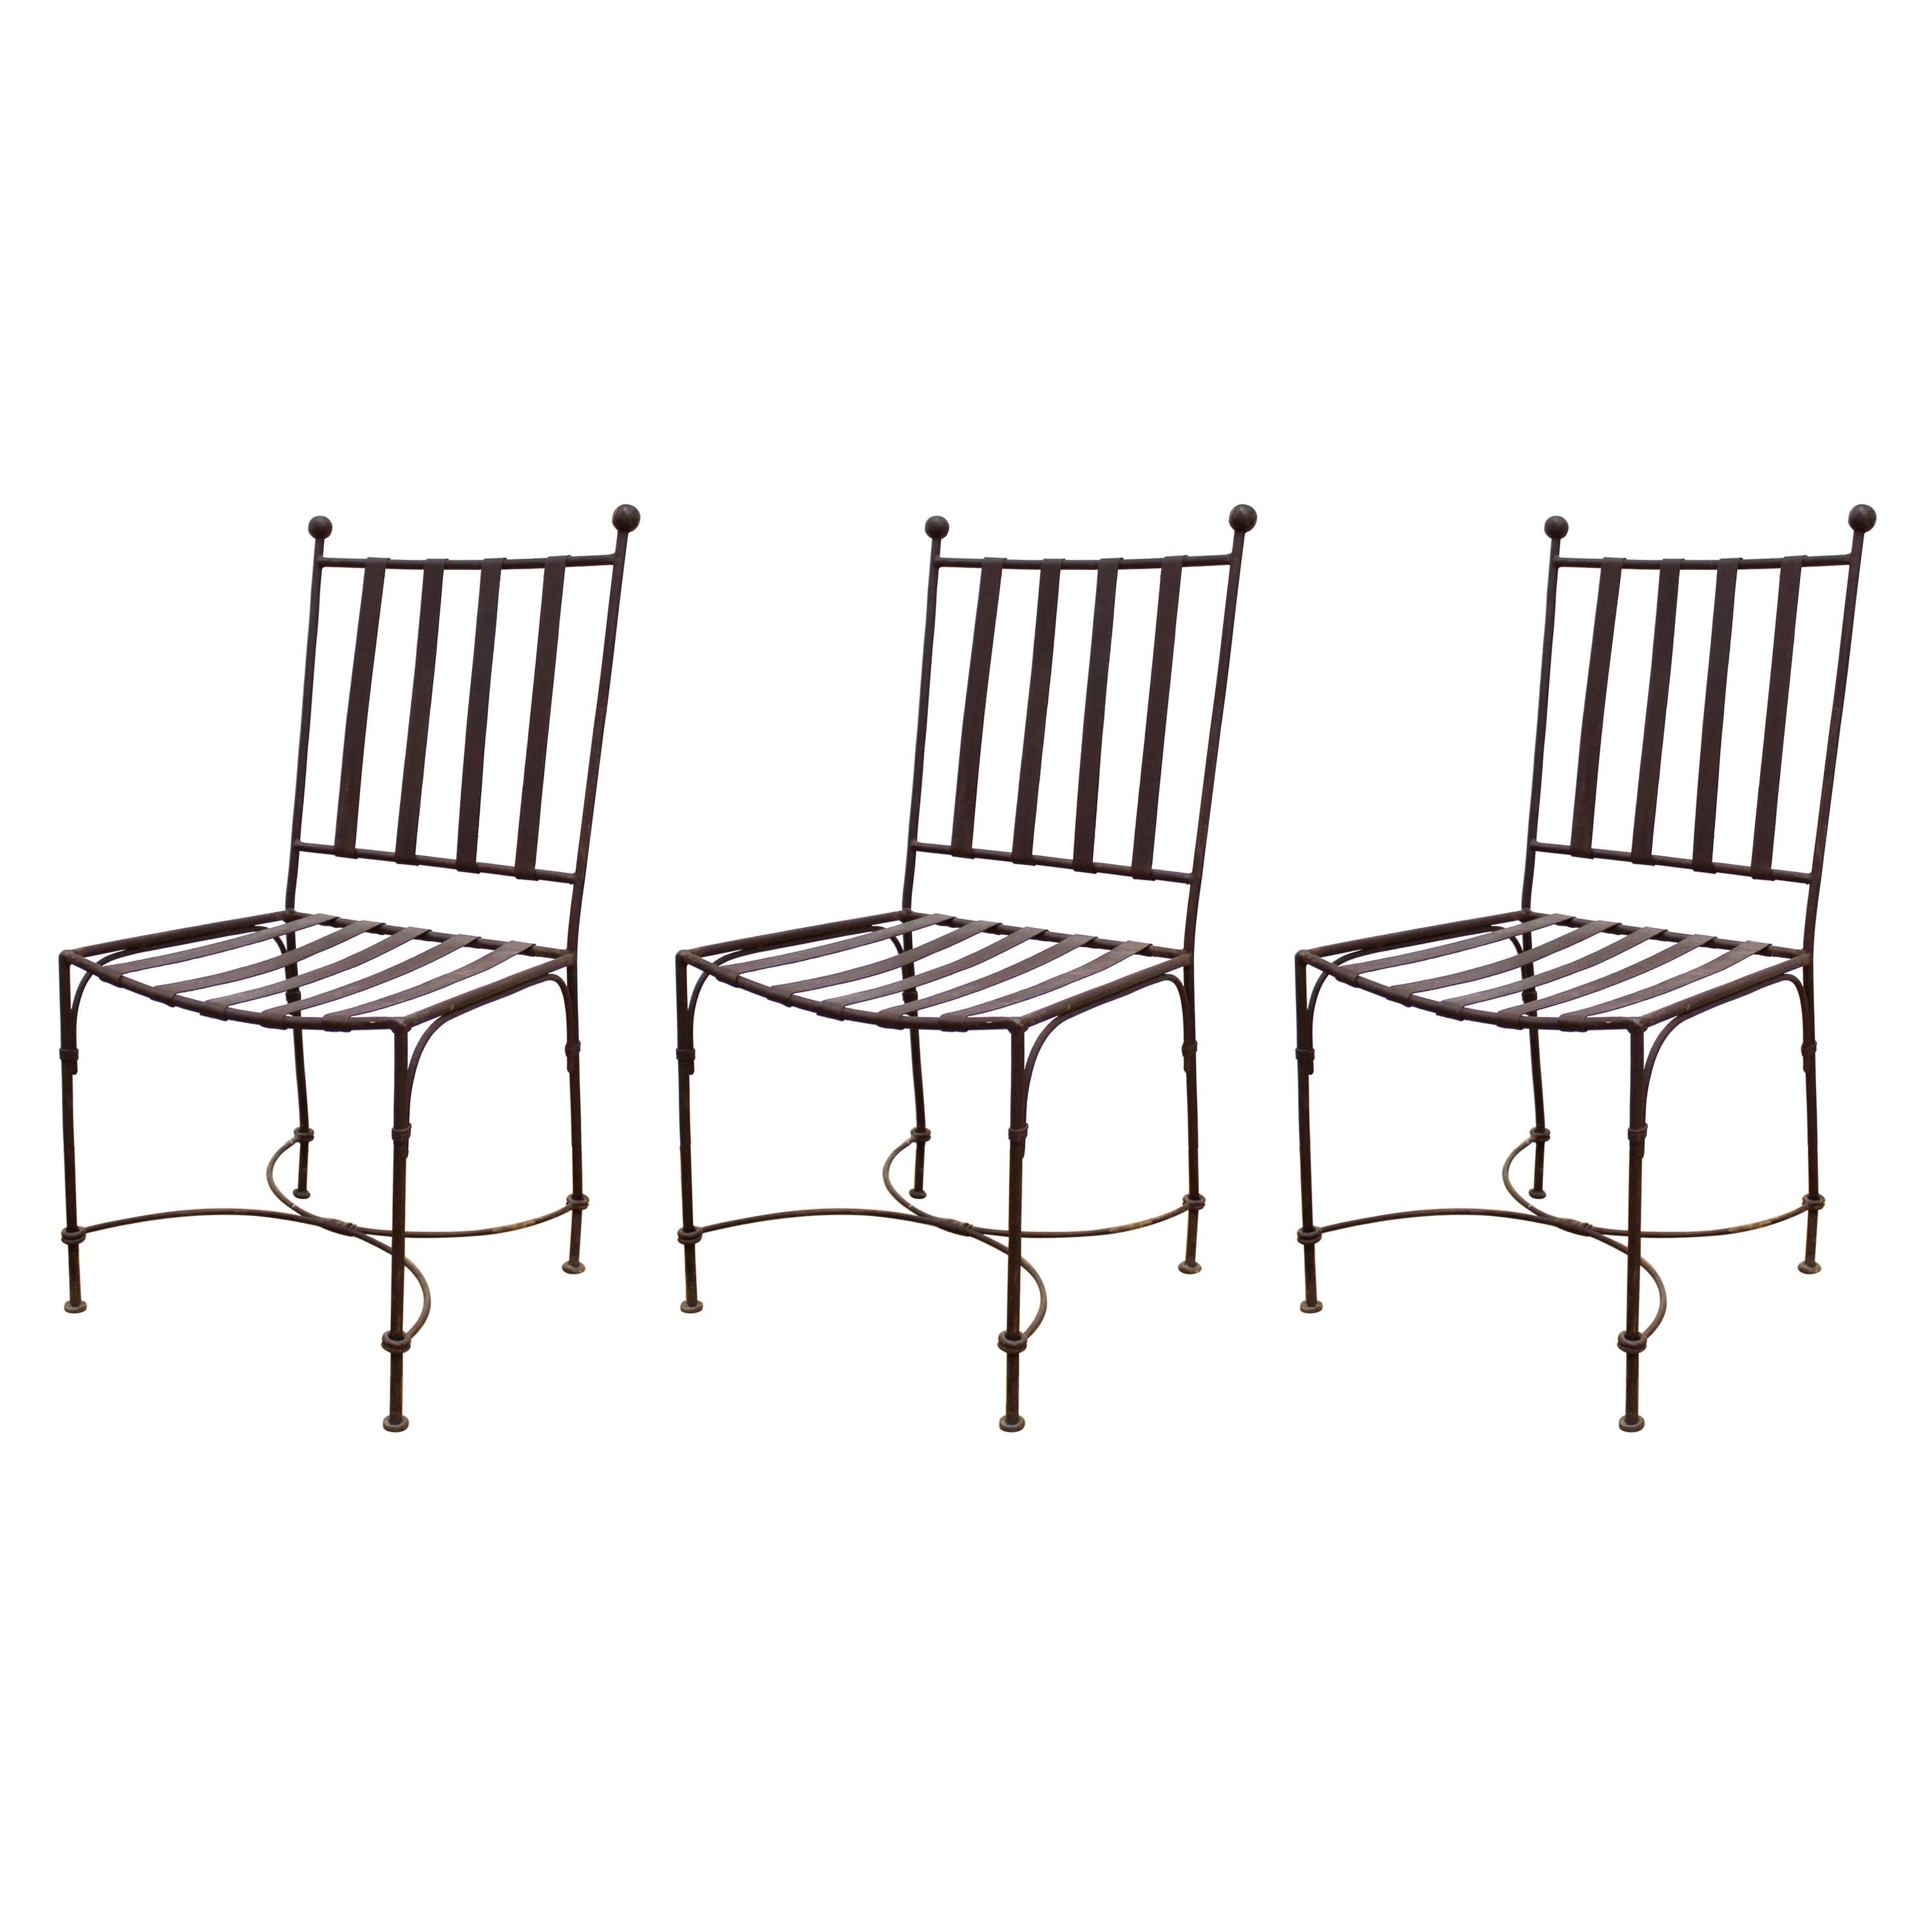 Modern Metal Patio Chairs in Style of Giacometti